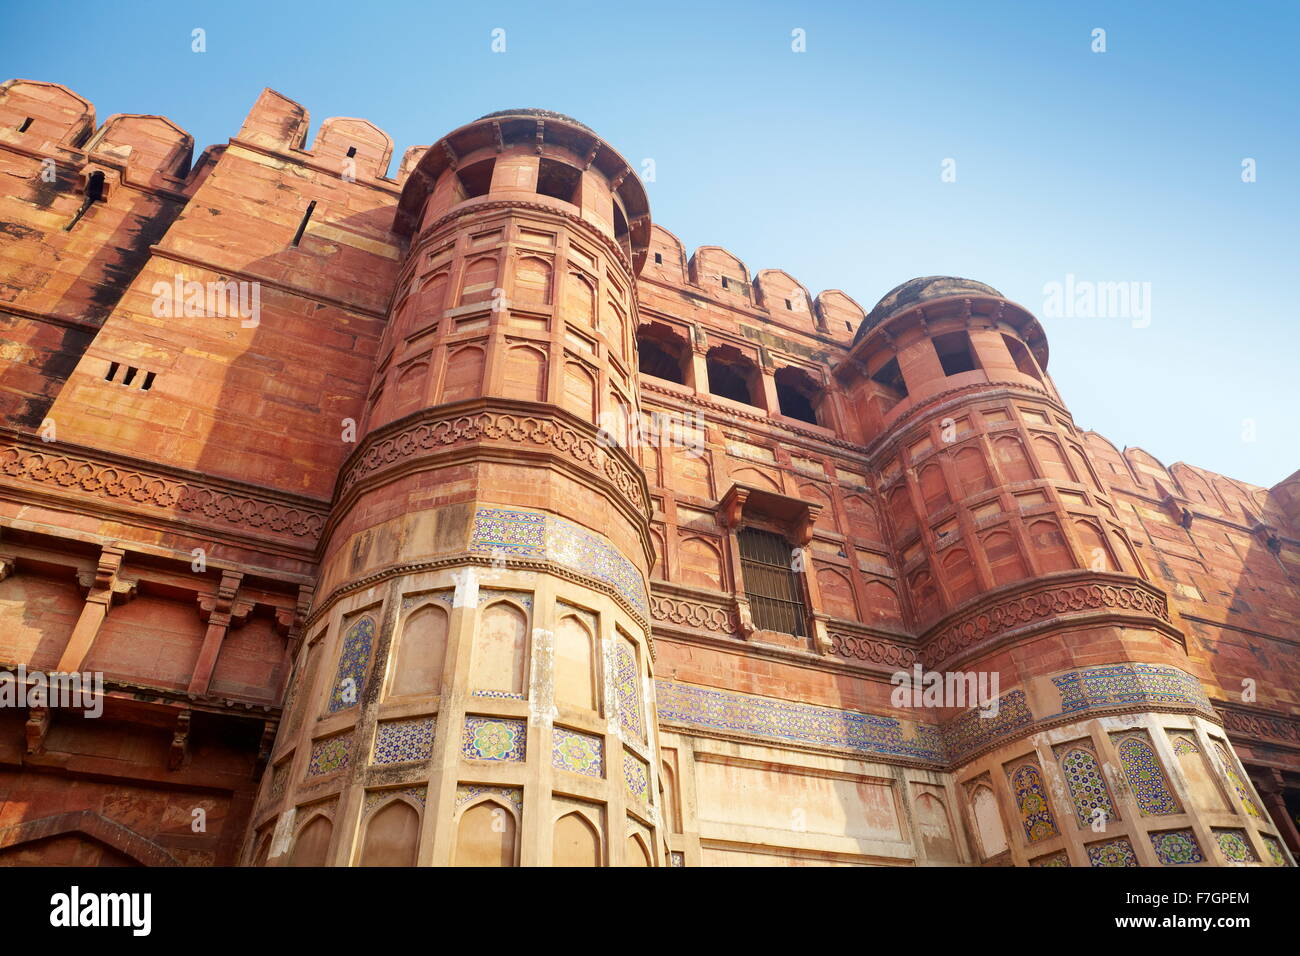 Agra Red Fort - The Amar Singh Gate, India Stock Photo